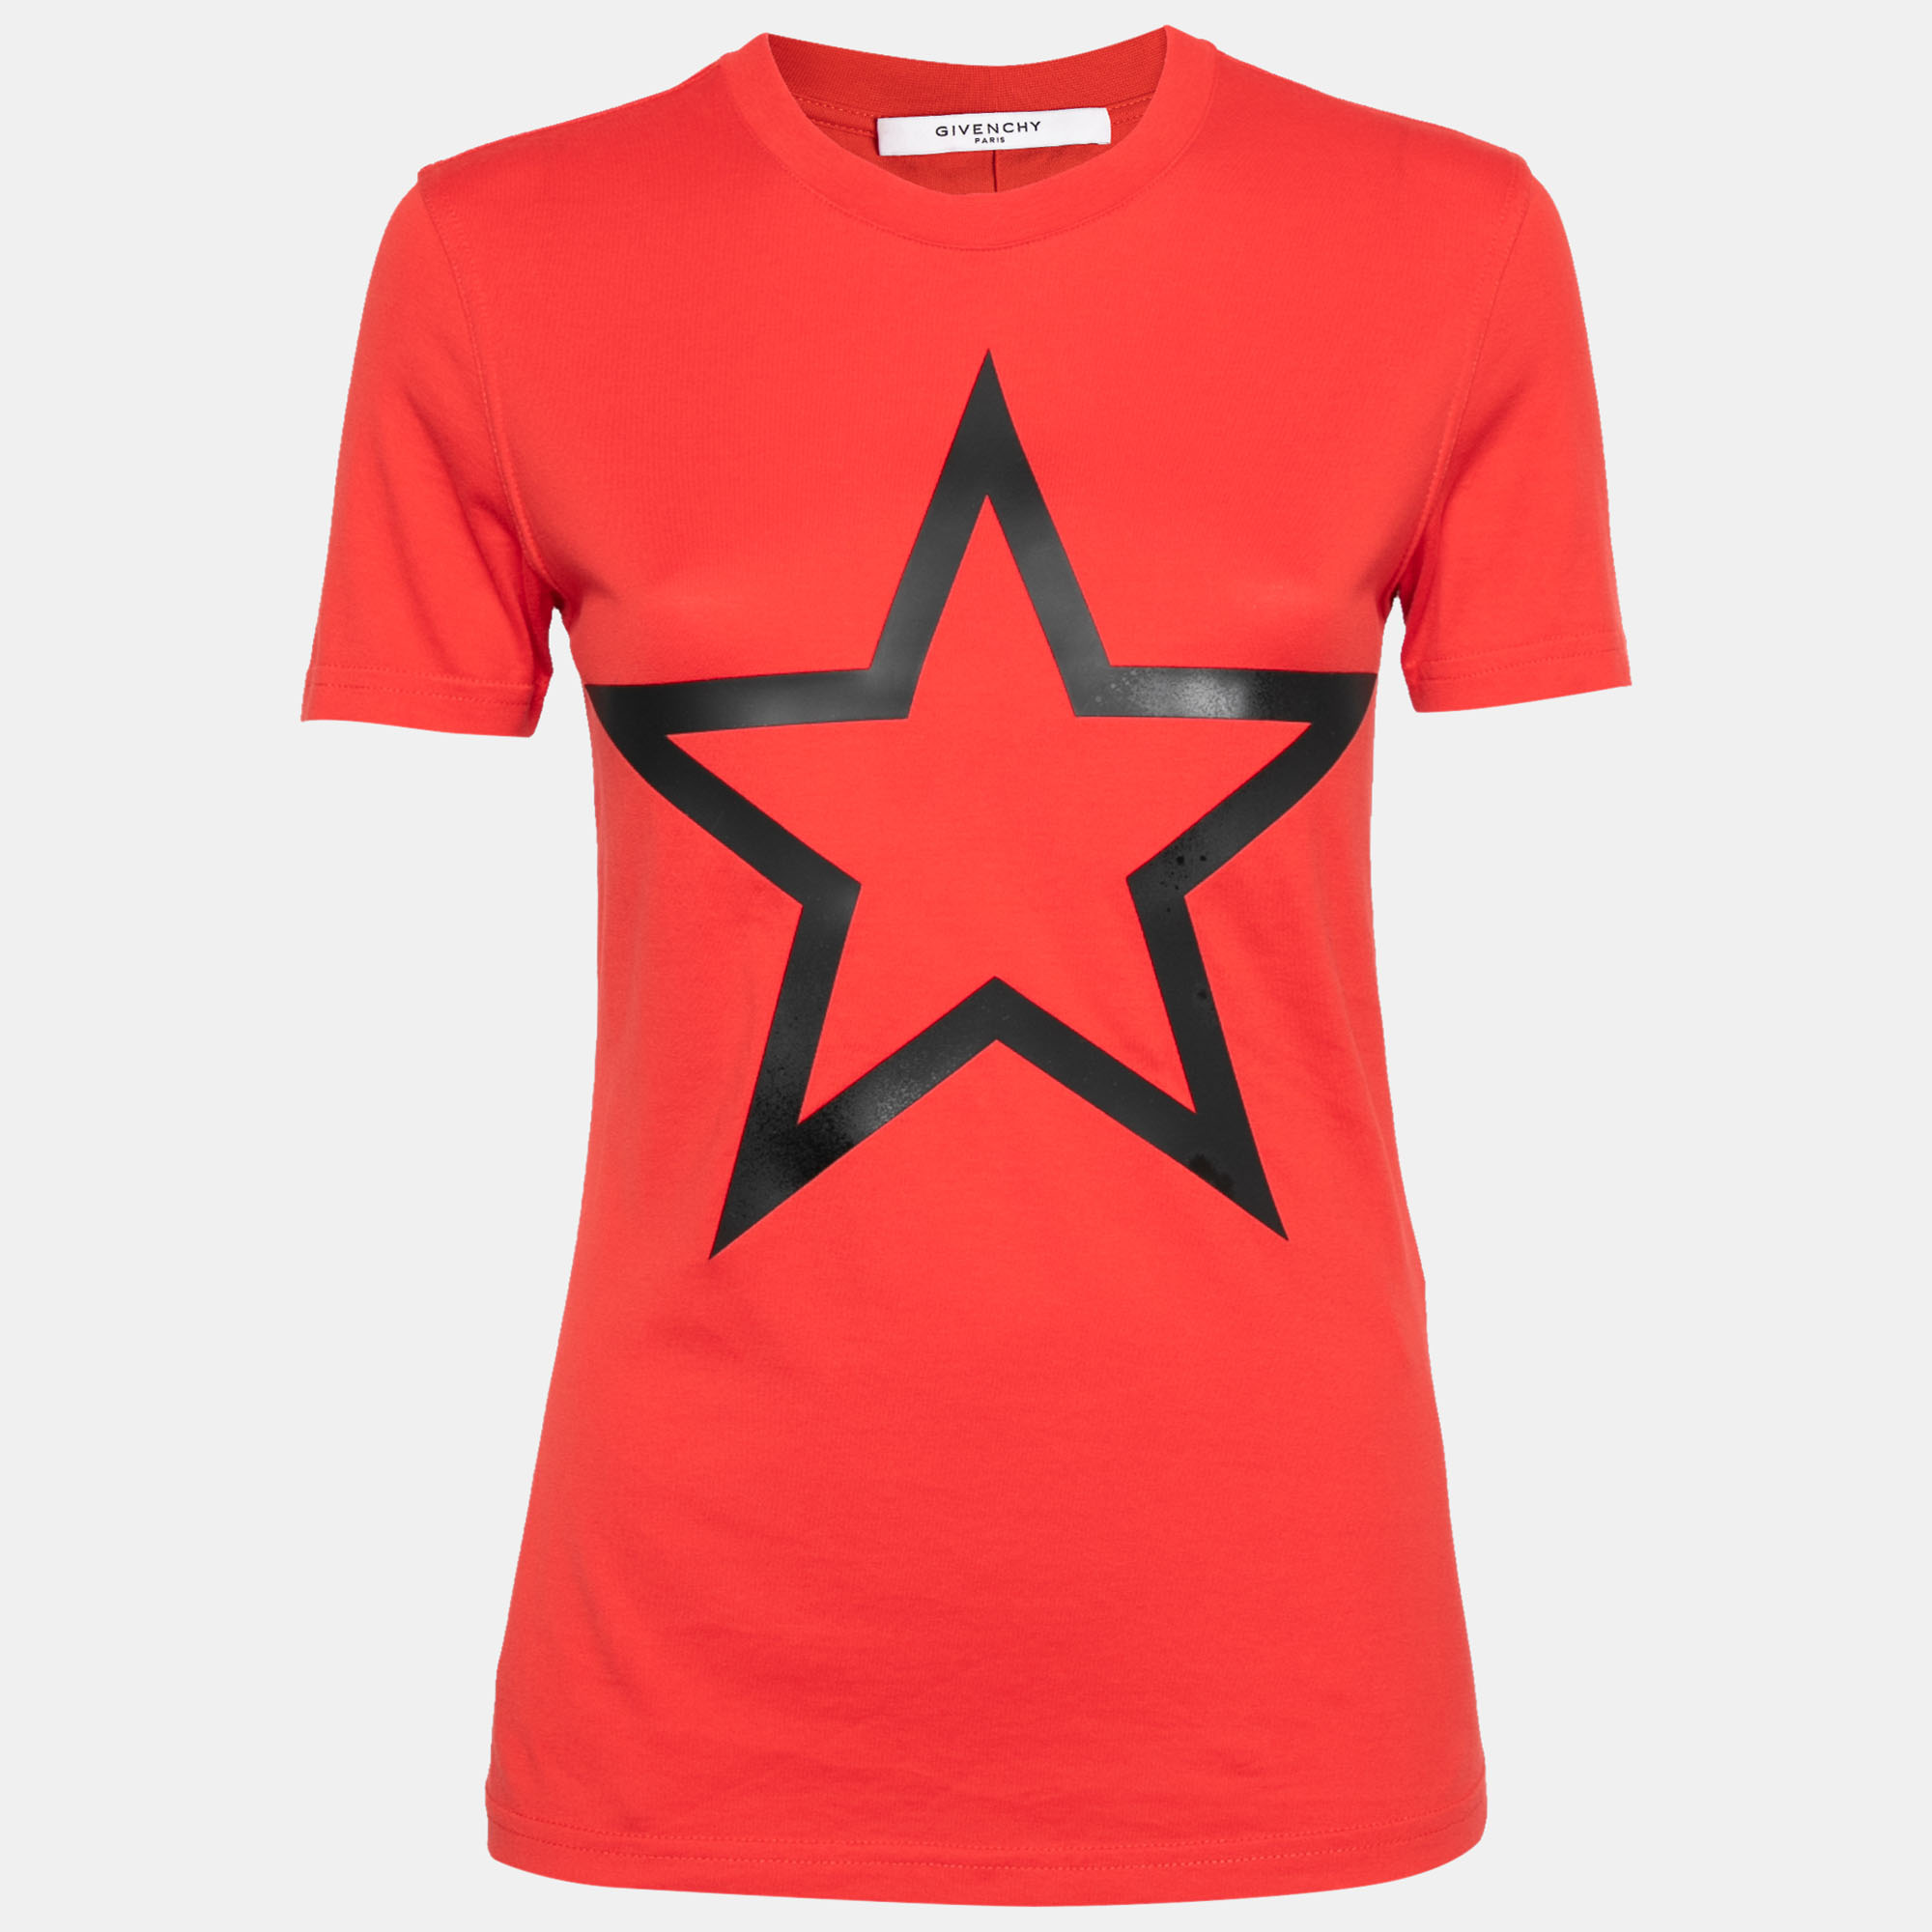 Givenchy Red Cotton Star Appliqued Short Sleeve T-Shirt S